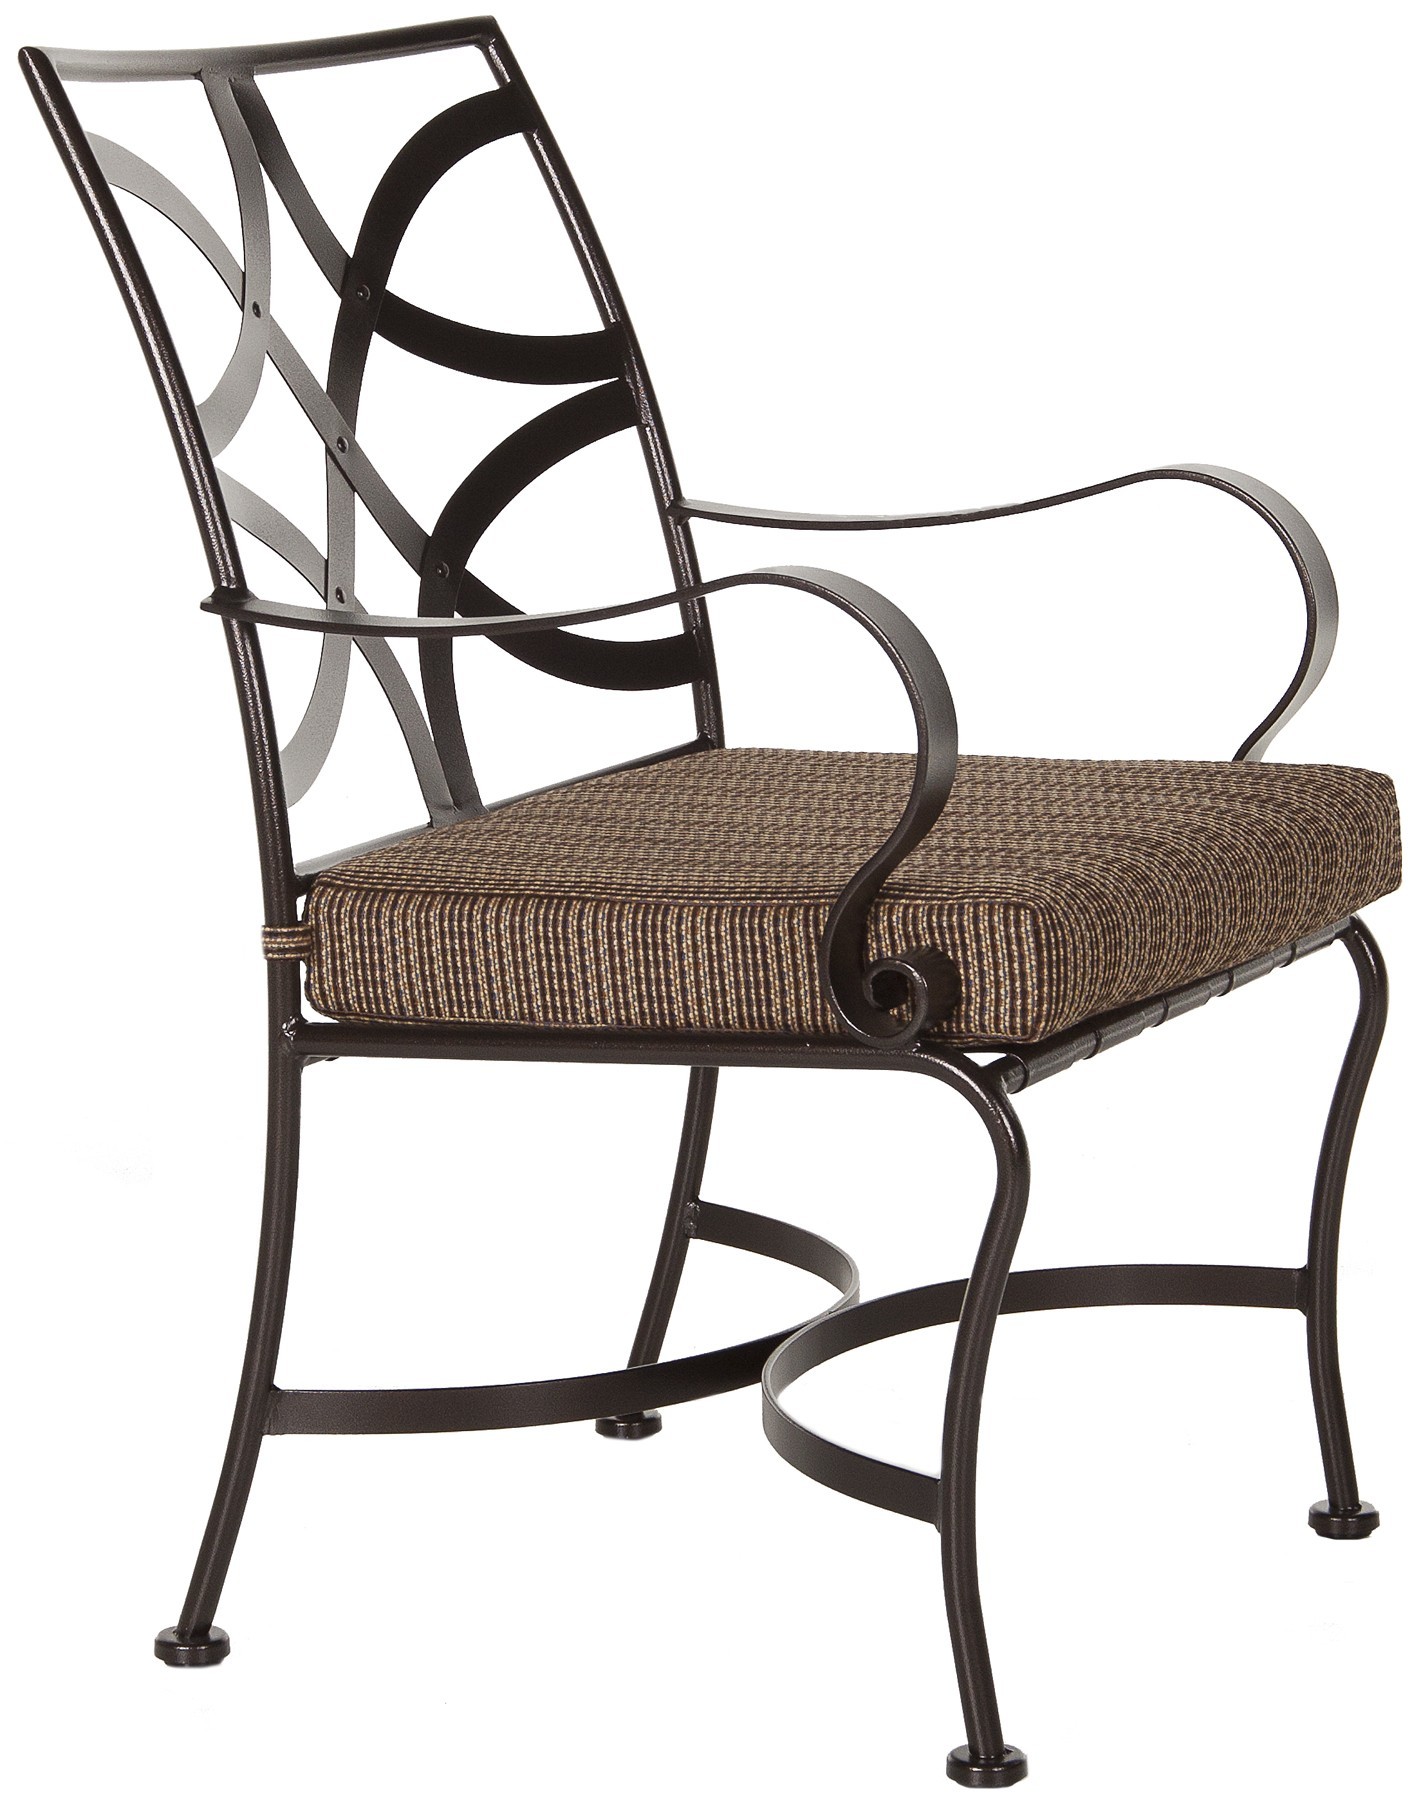 Wrought Iron Patio Furniture Hausers Patio